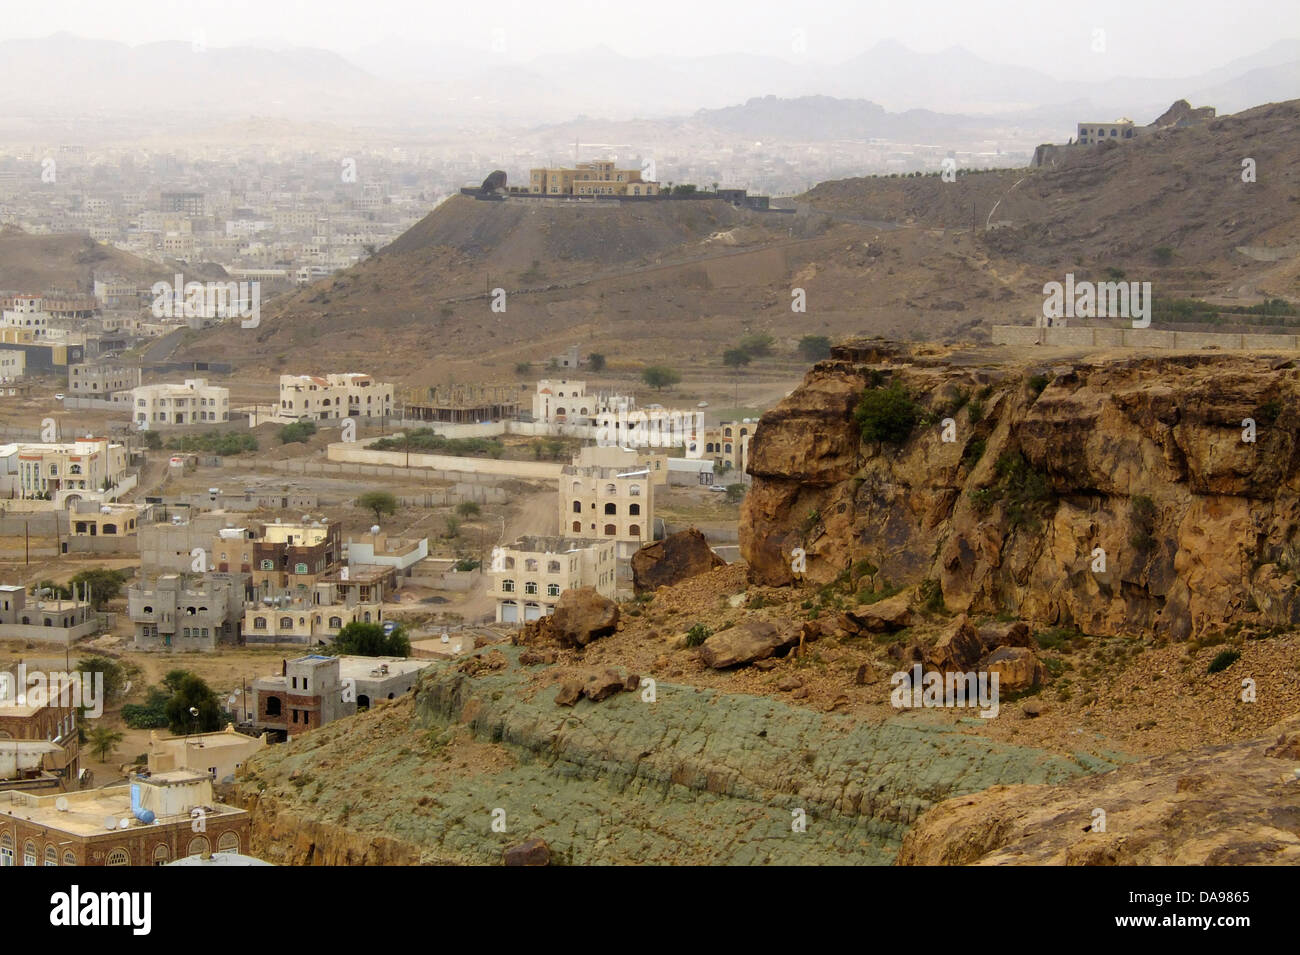 Republic of Yemen, Sana'a, Near East. One of the oldest continuously inhabited cities and one of the ighest capital cities. Stock Photo